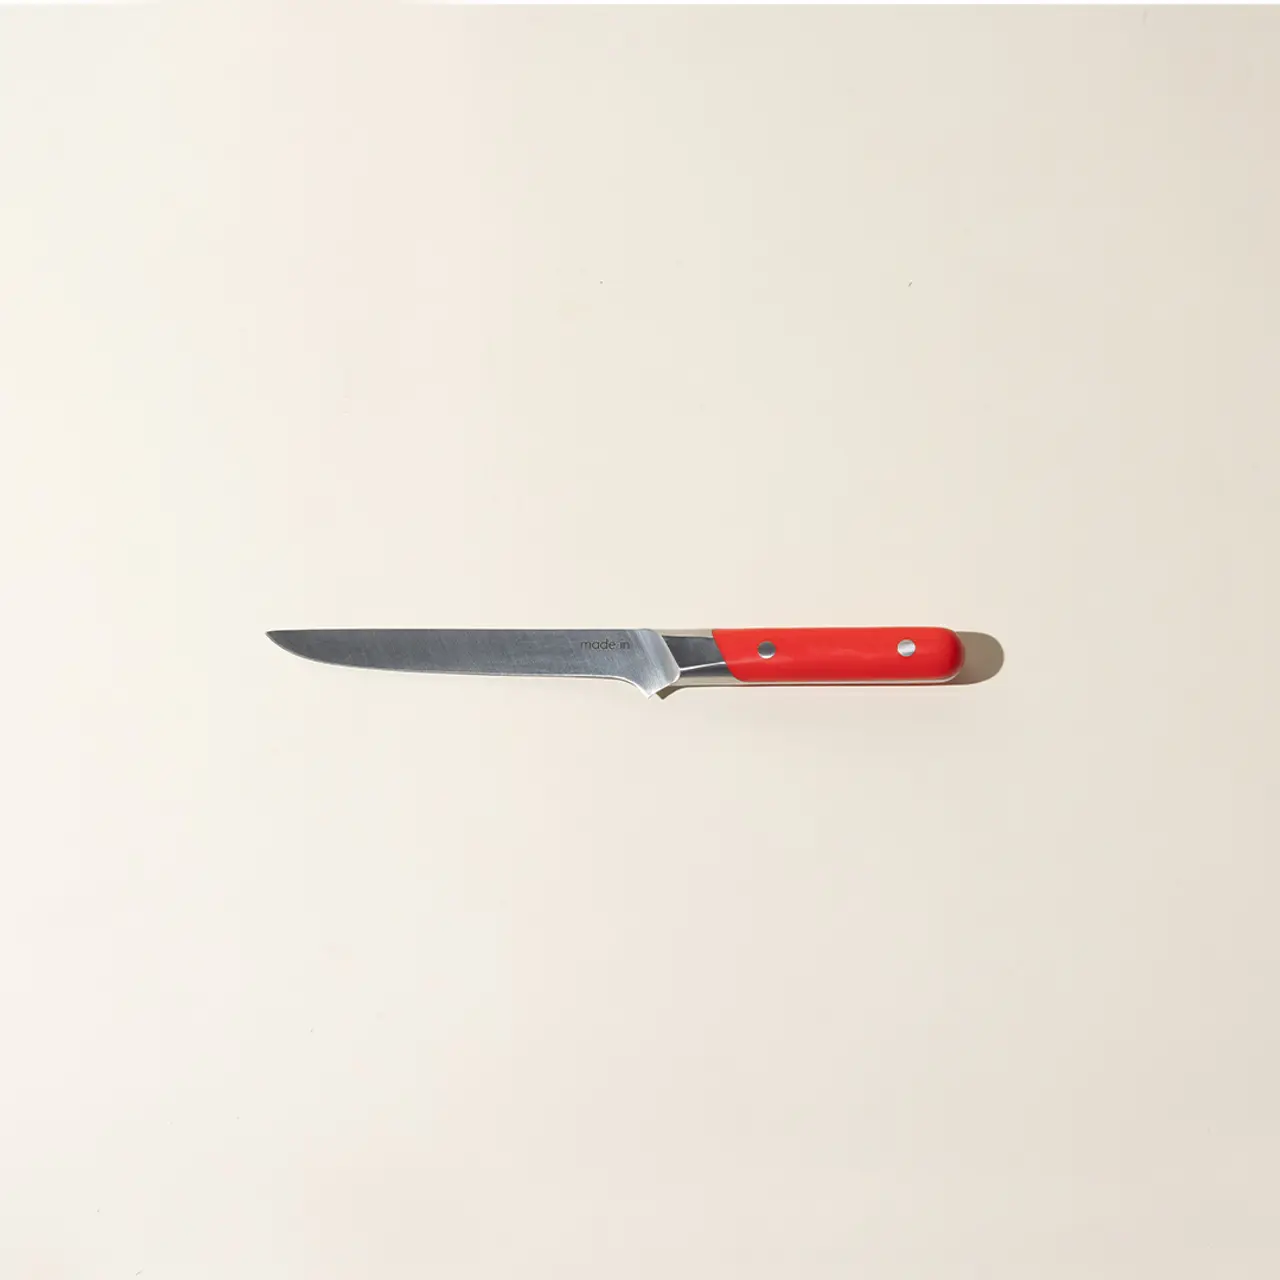 A single kitchen knife with a red handle lies centered on a plain beige background.